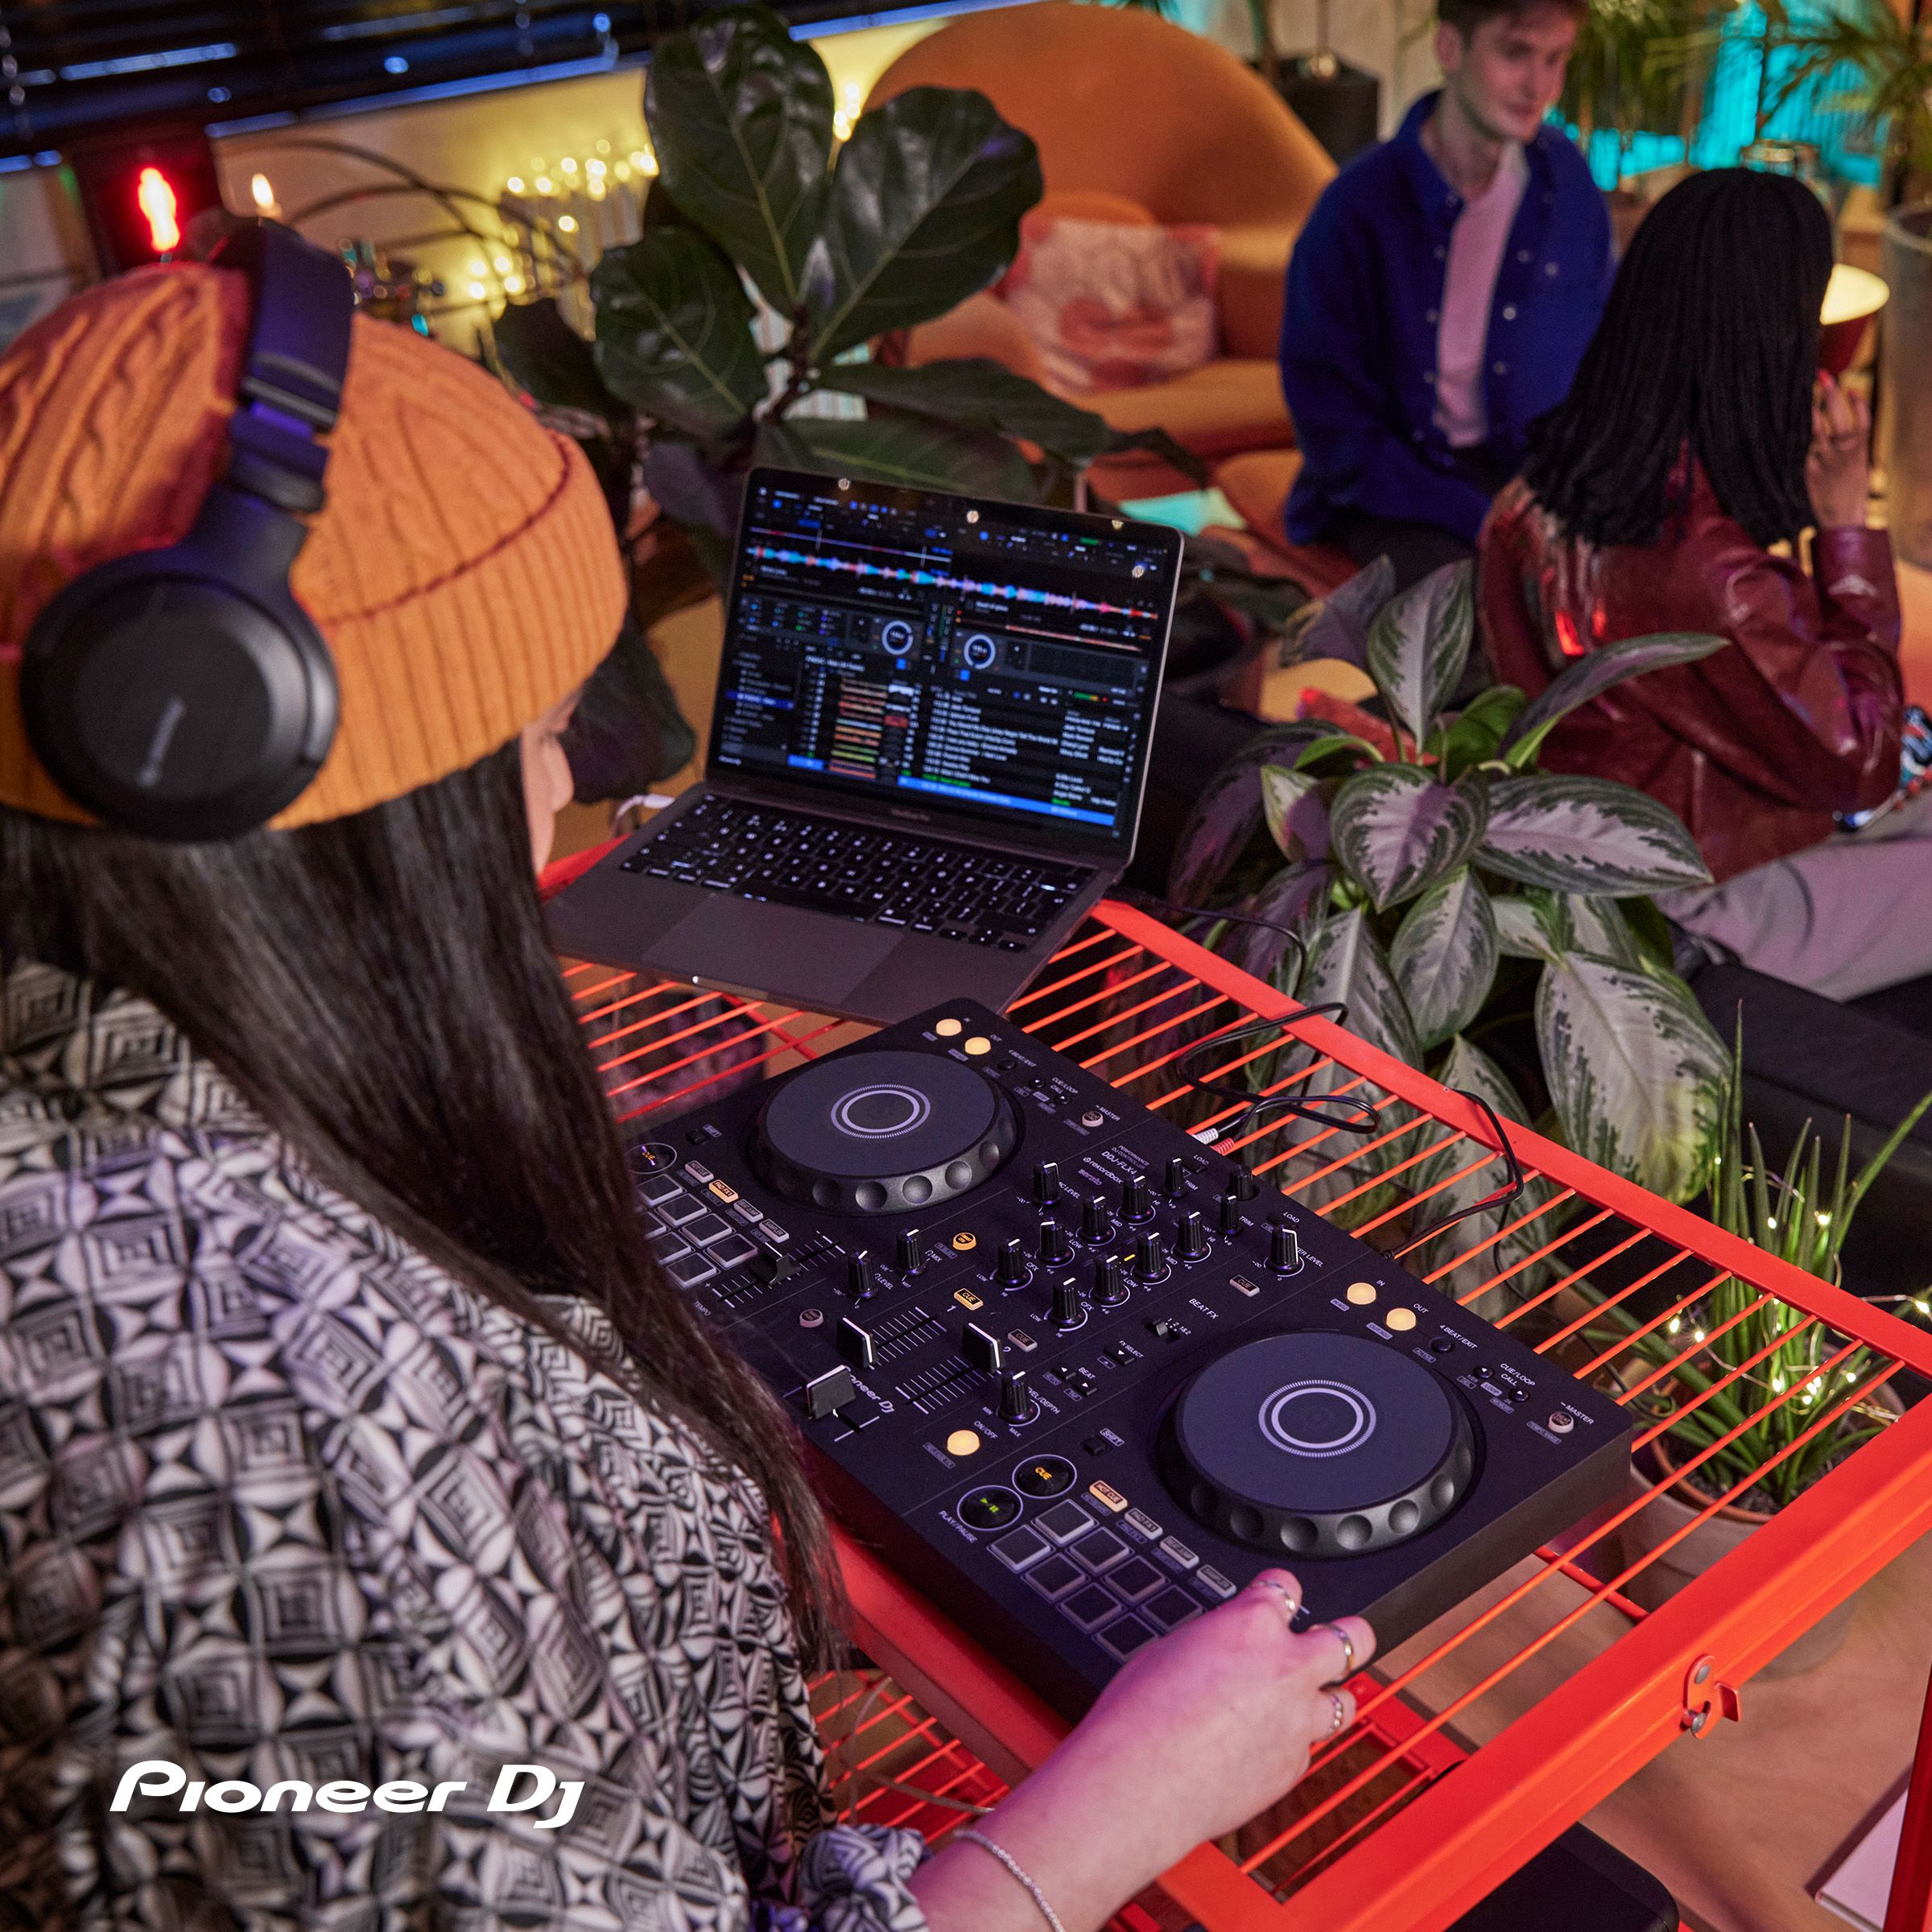 It’s a Vibe Introducing the DDJ-FLX4 2-channel DJ Controller with a professional feel and simple user friendly design that’s perfect for beginners to start exploring DJing